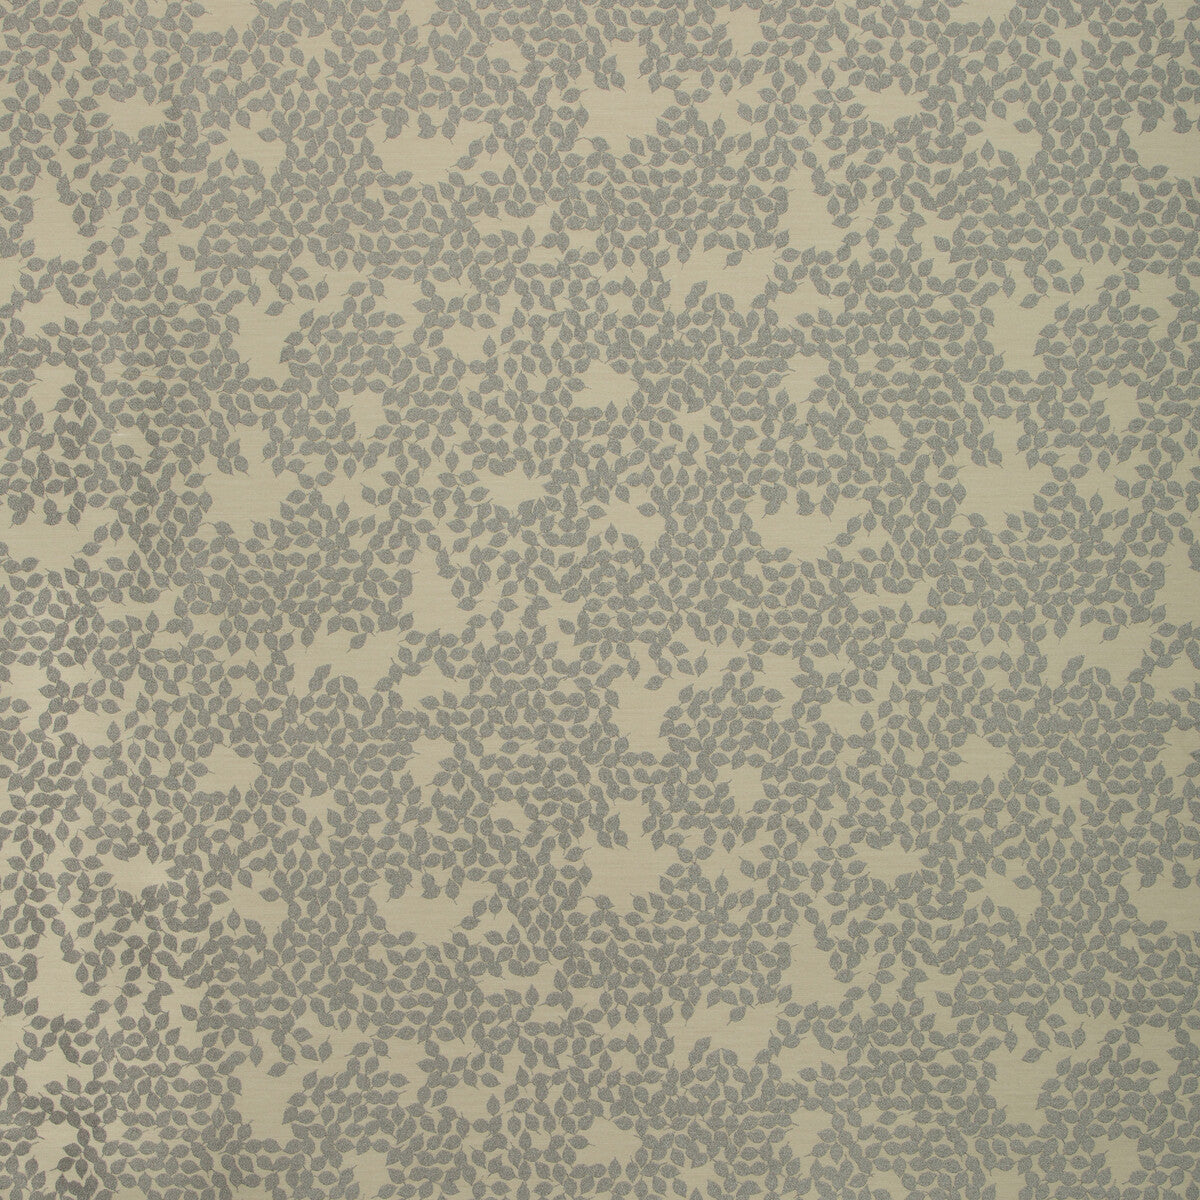 Dancing Leaves fabric in silver color - pattern 35091.21.0 - by Kravet Contract in the Gis Crypton collection